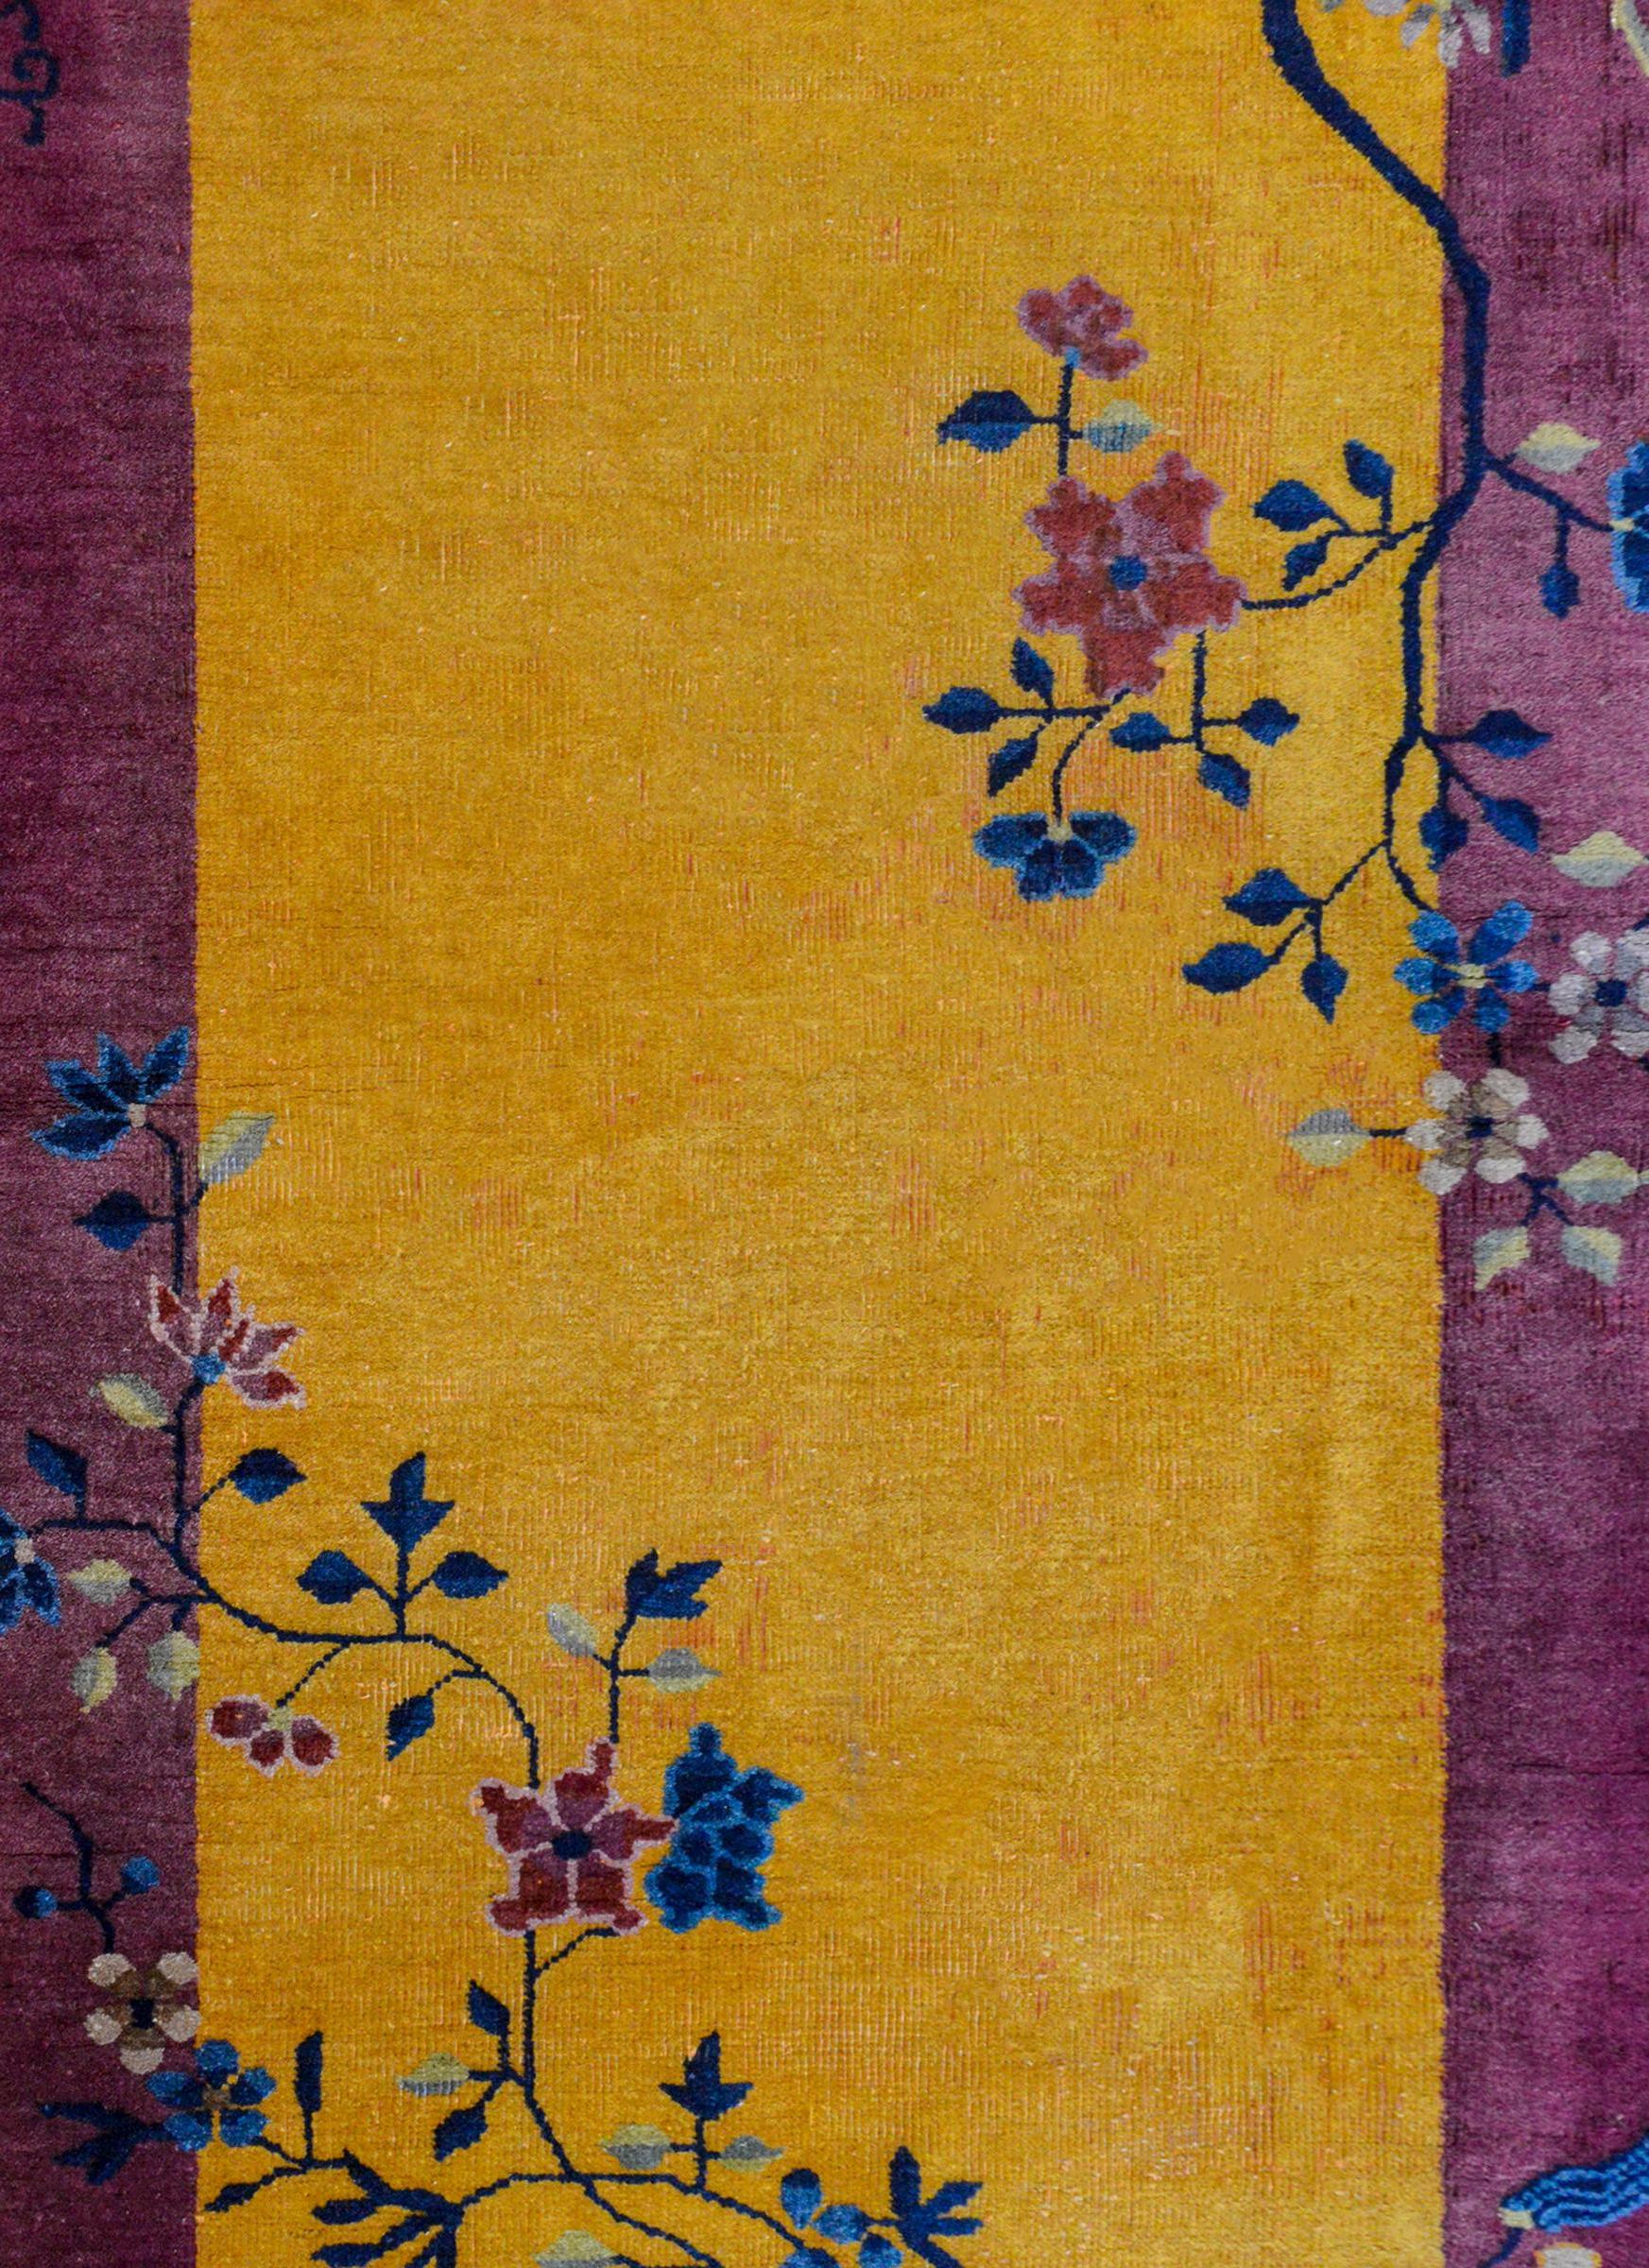 A gorgeous early 20th century Chinese Art Deco rug with a rich goldenrod central field surrounded by a wide violet border, overlaid with multicolored potted prunus, chrysanthemum, and peony plants with auspicious scholar's objects in opposite